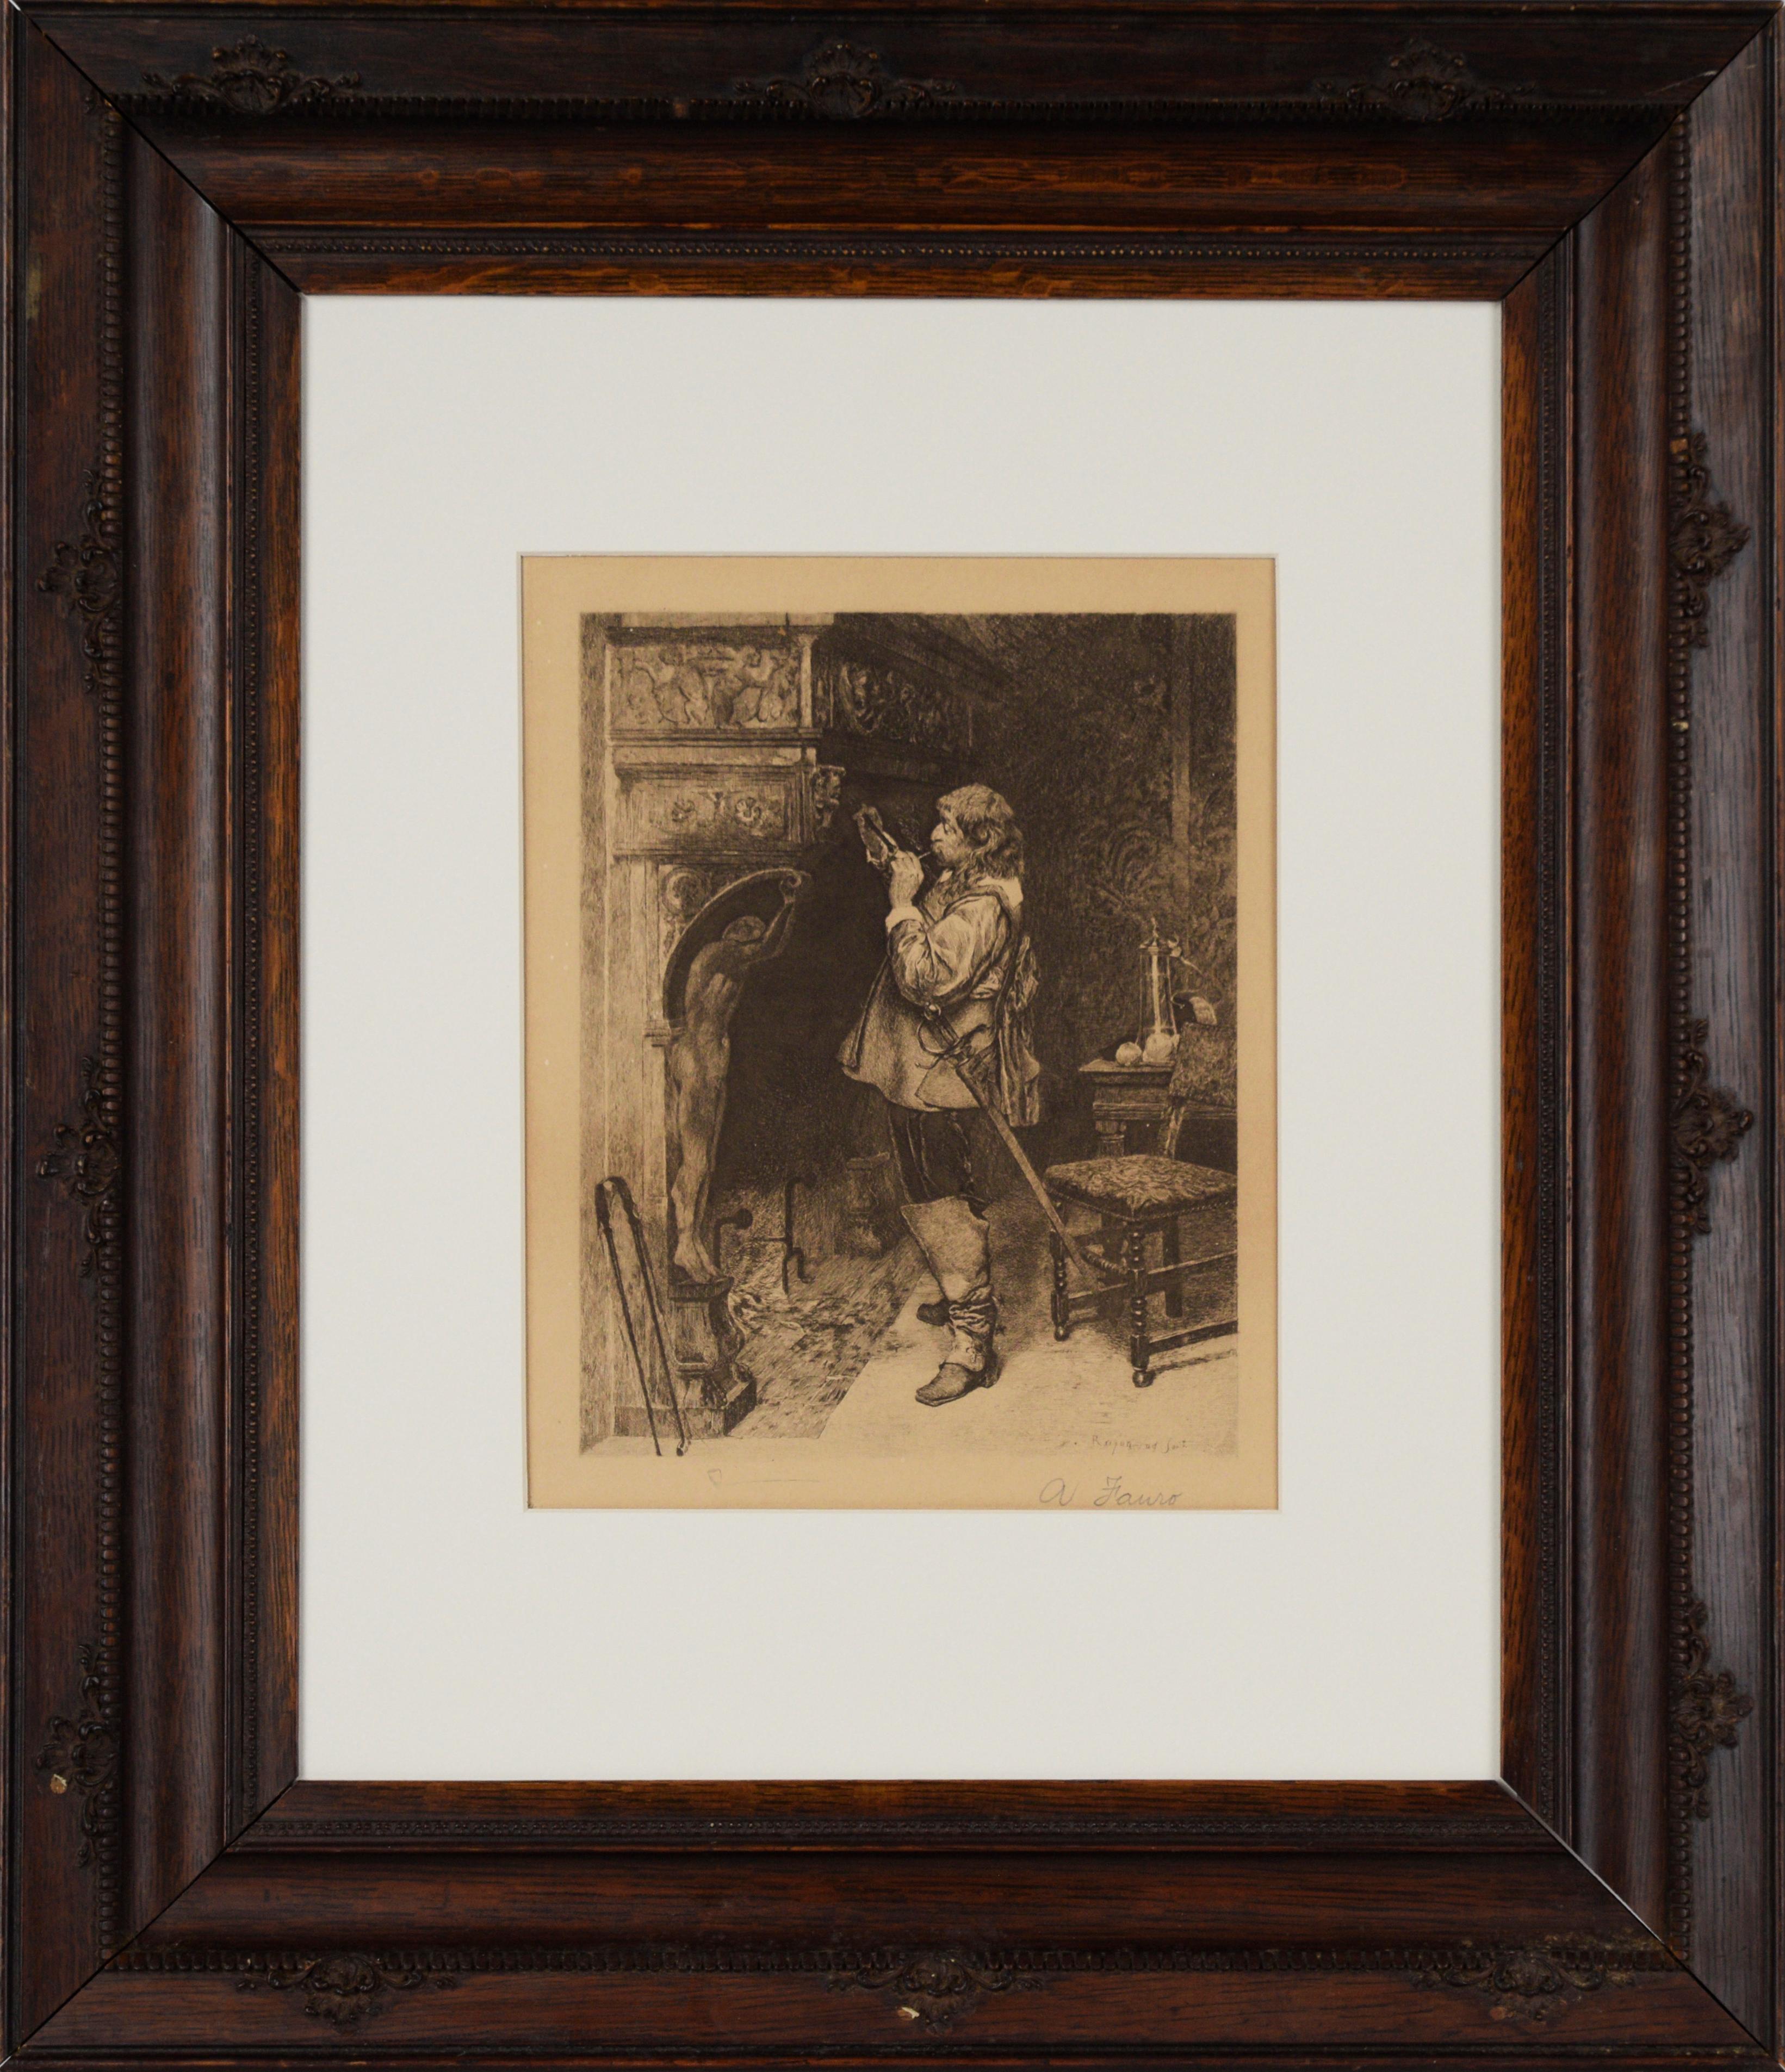 Paul Adolphe Rajon Figurative Print - Antique Lithograph Shakespeare's  "The Taming Of The Shrew" Character Petruchio